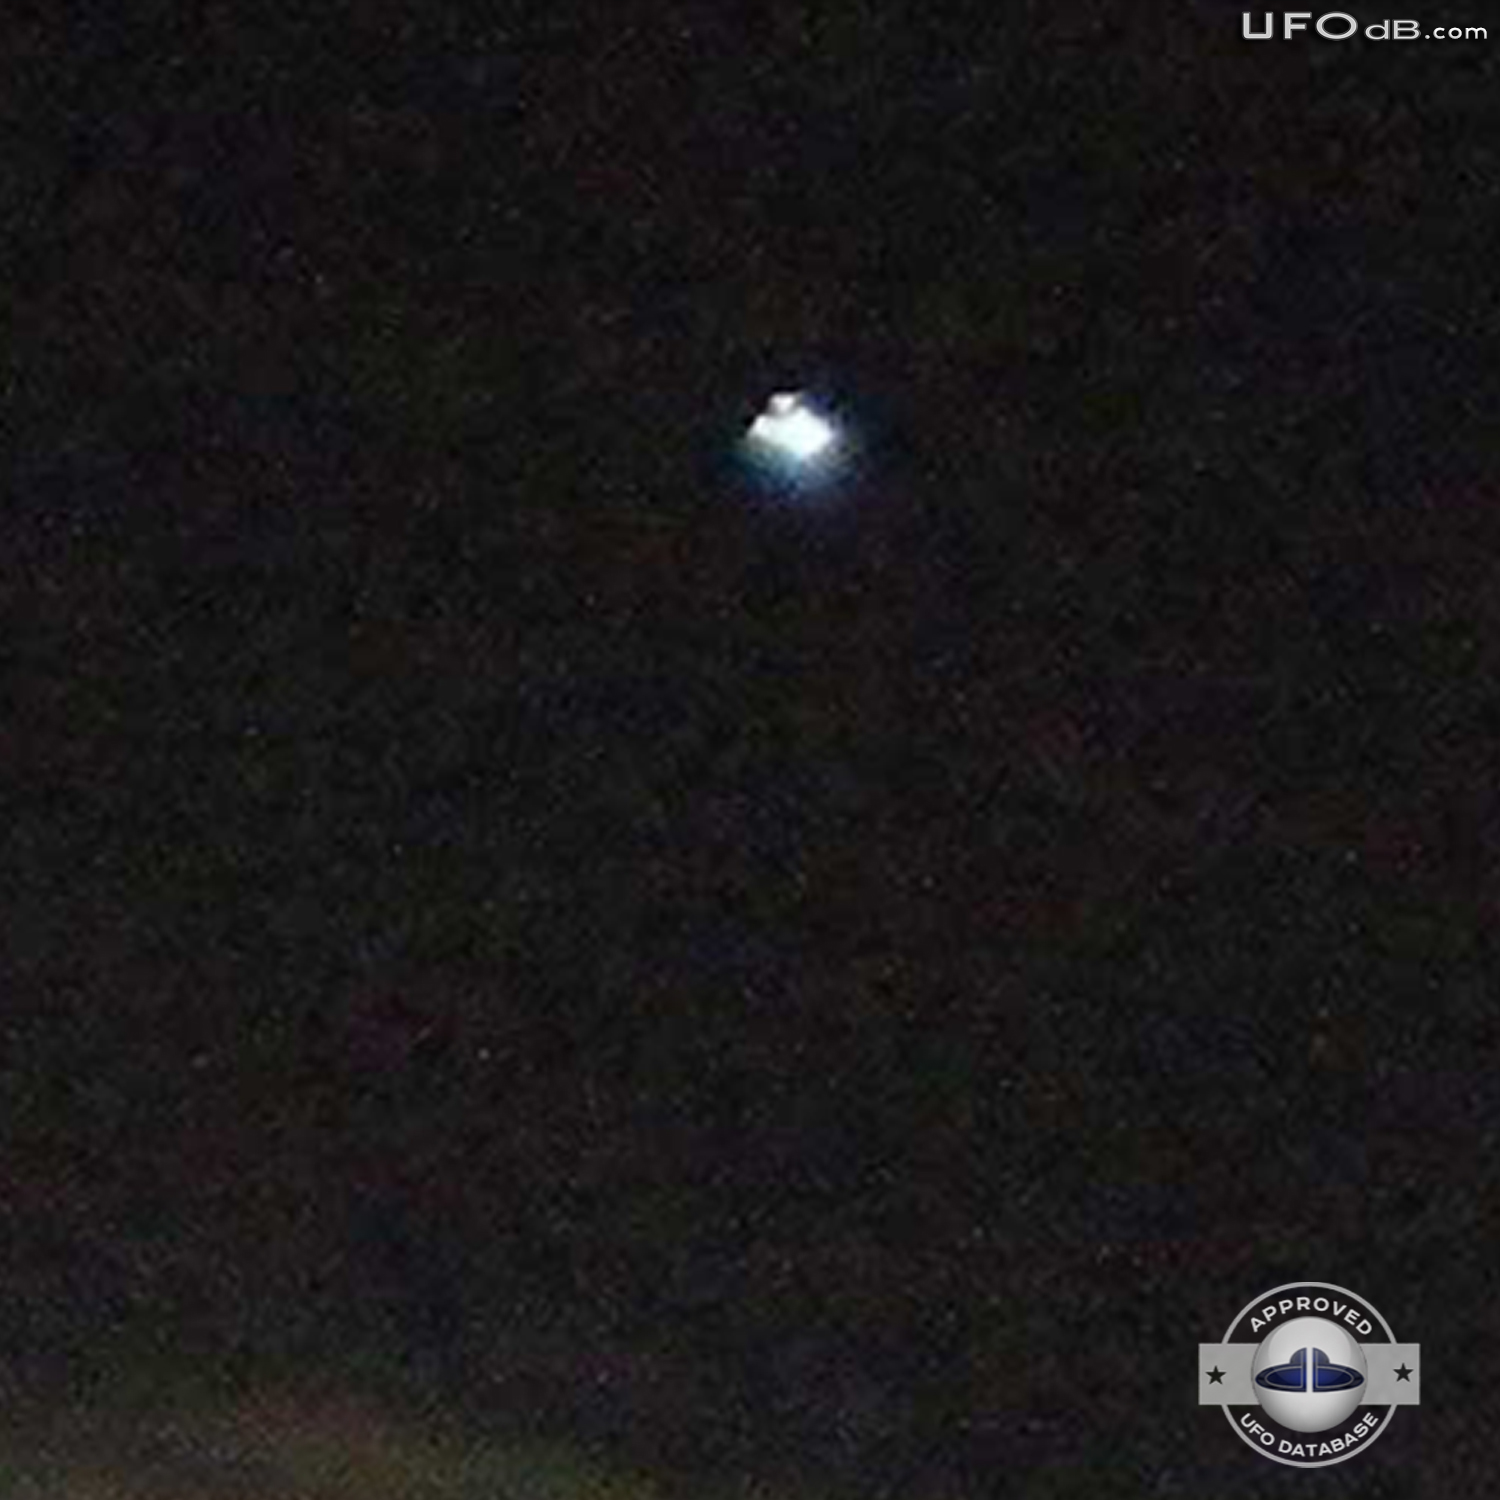 Moon picture captures bright white glowing UFO over a city in Ecuador UFO Picture #352-3